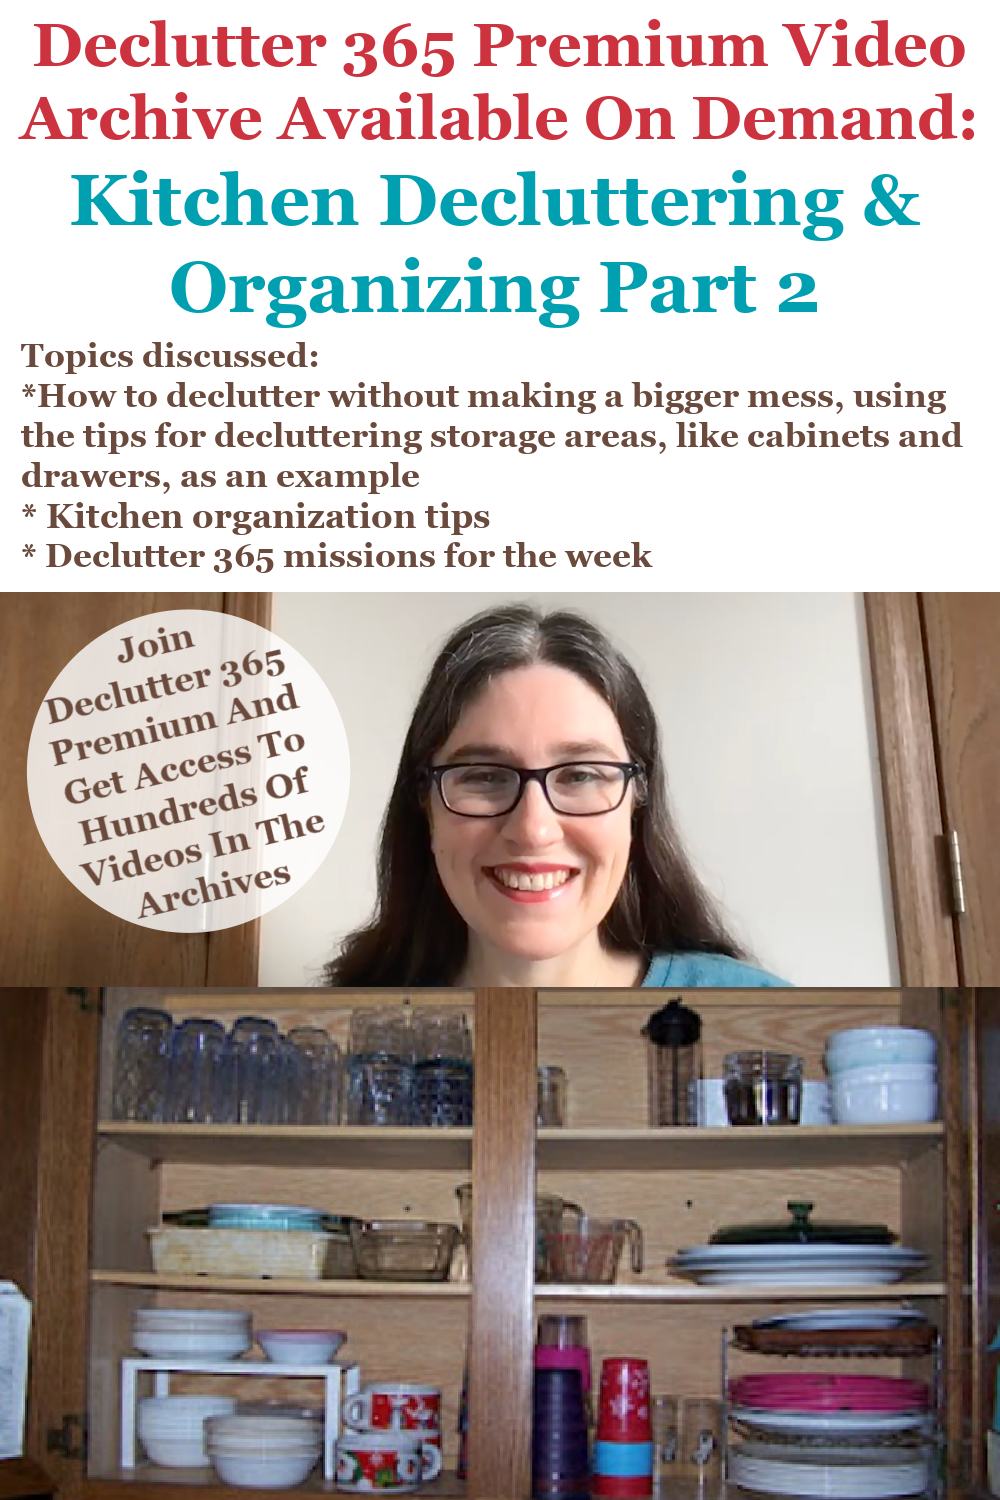 Declutter 365 Premium video archive available on demand all about kitchen decluttering and organizing, part 2, on Home Storage Solutions 101